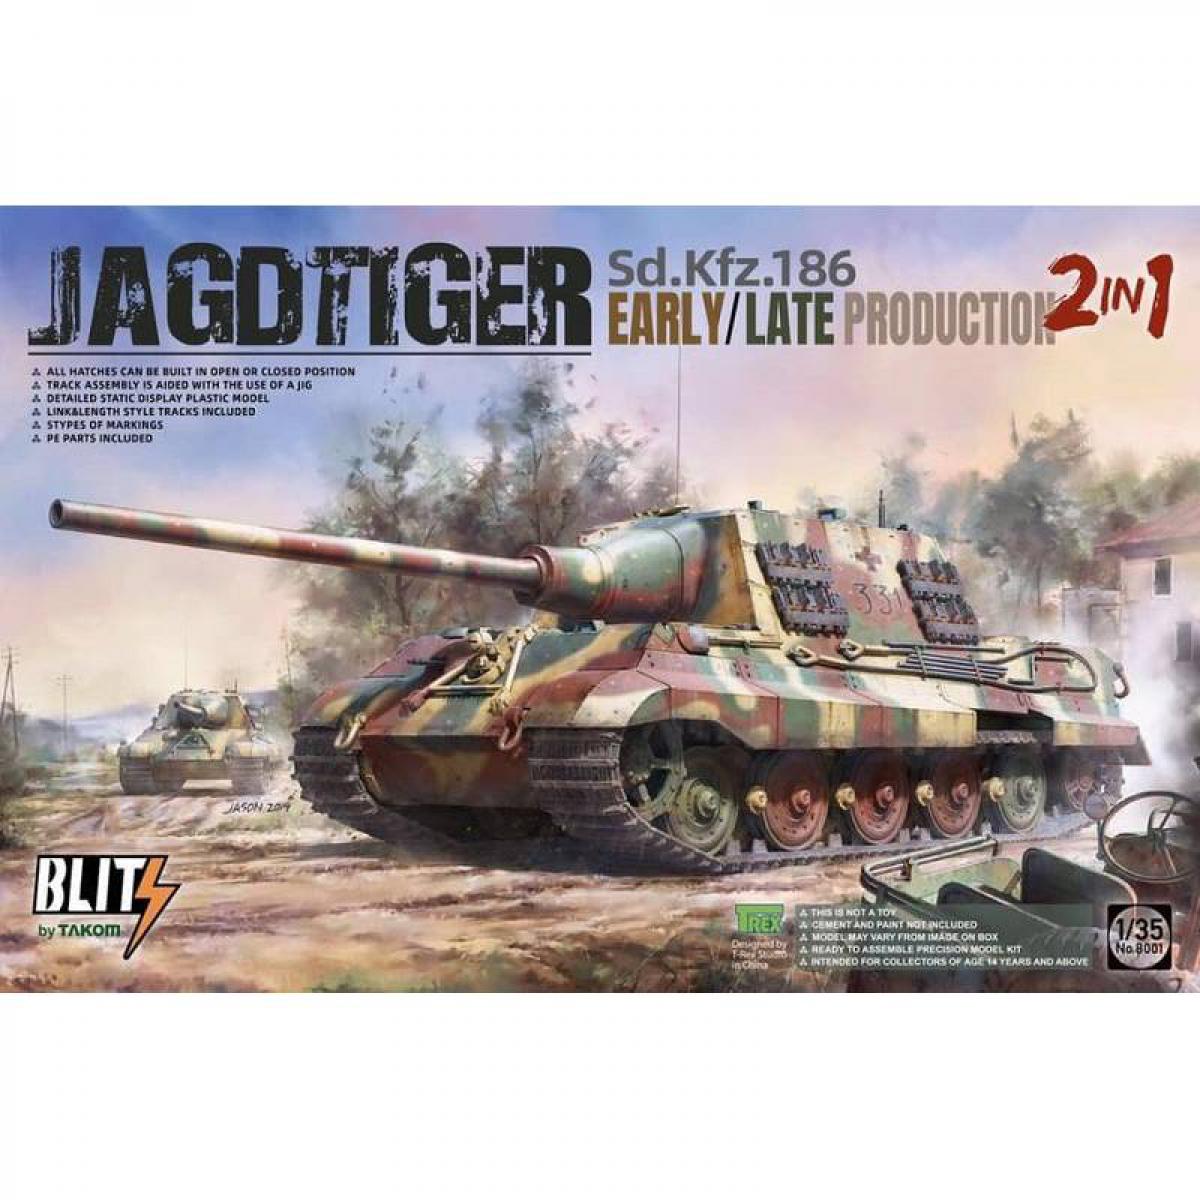 Takom - Maquette Char Sd.kfz.186 Jagdtiger Early/late Production 2 In 1 - Chars